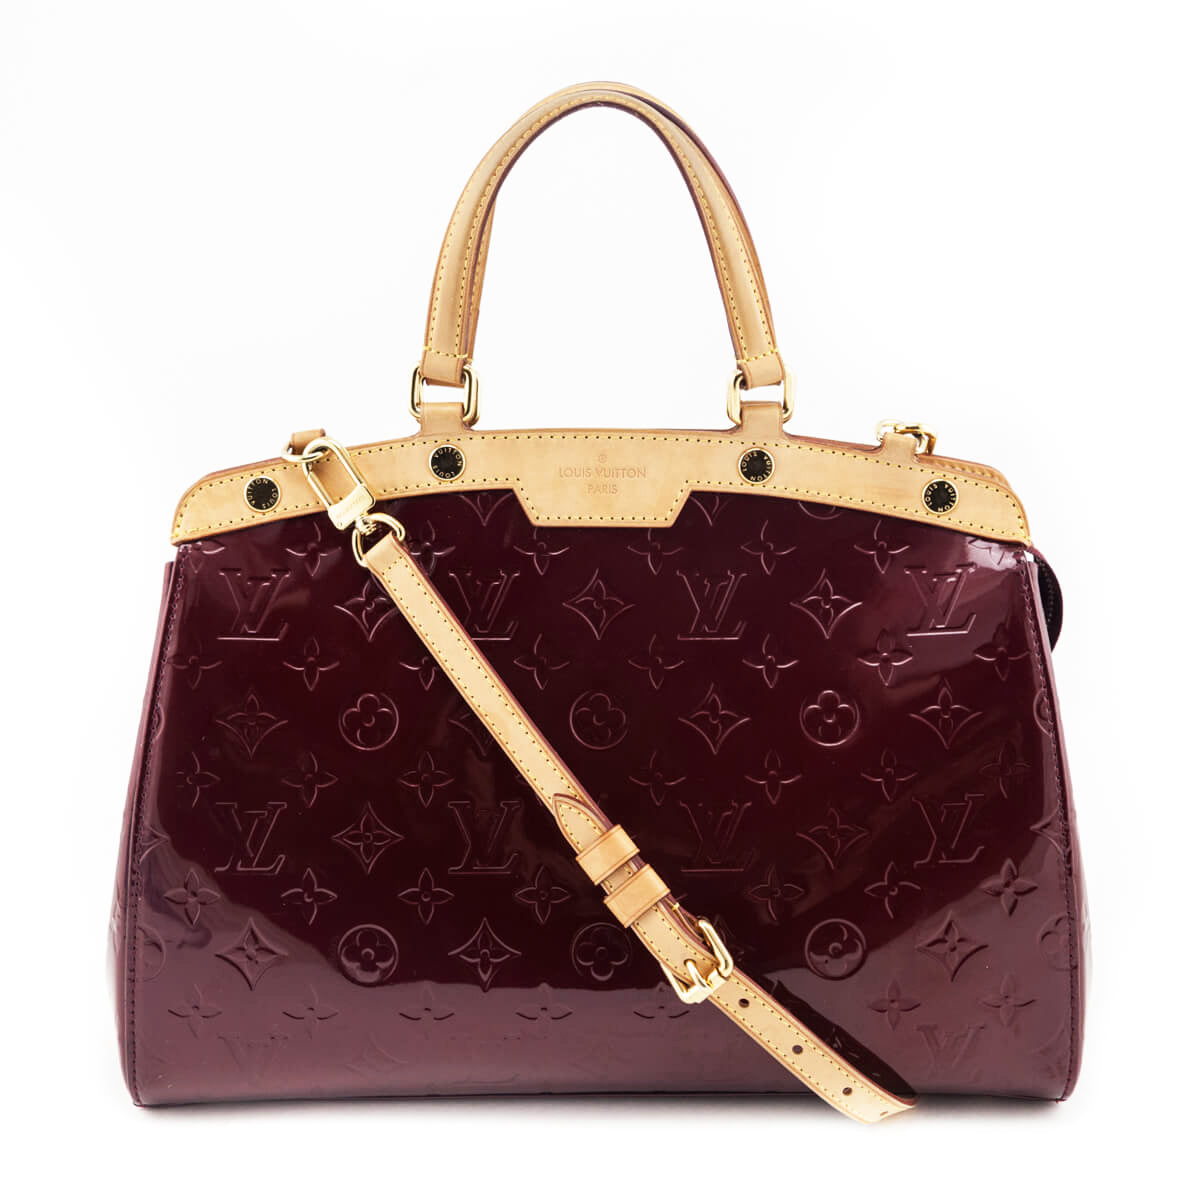 Top 10 Current Deal Bags - Authentic Designer Handbags for Less – Love that  Bag etc - Preowned Designer Fashions